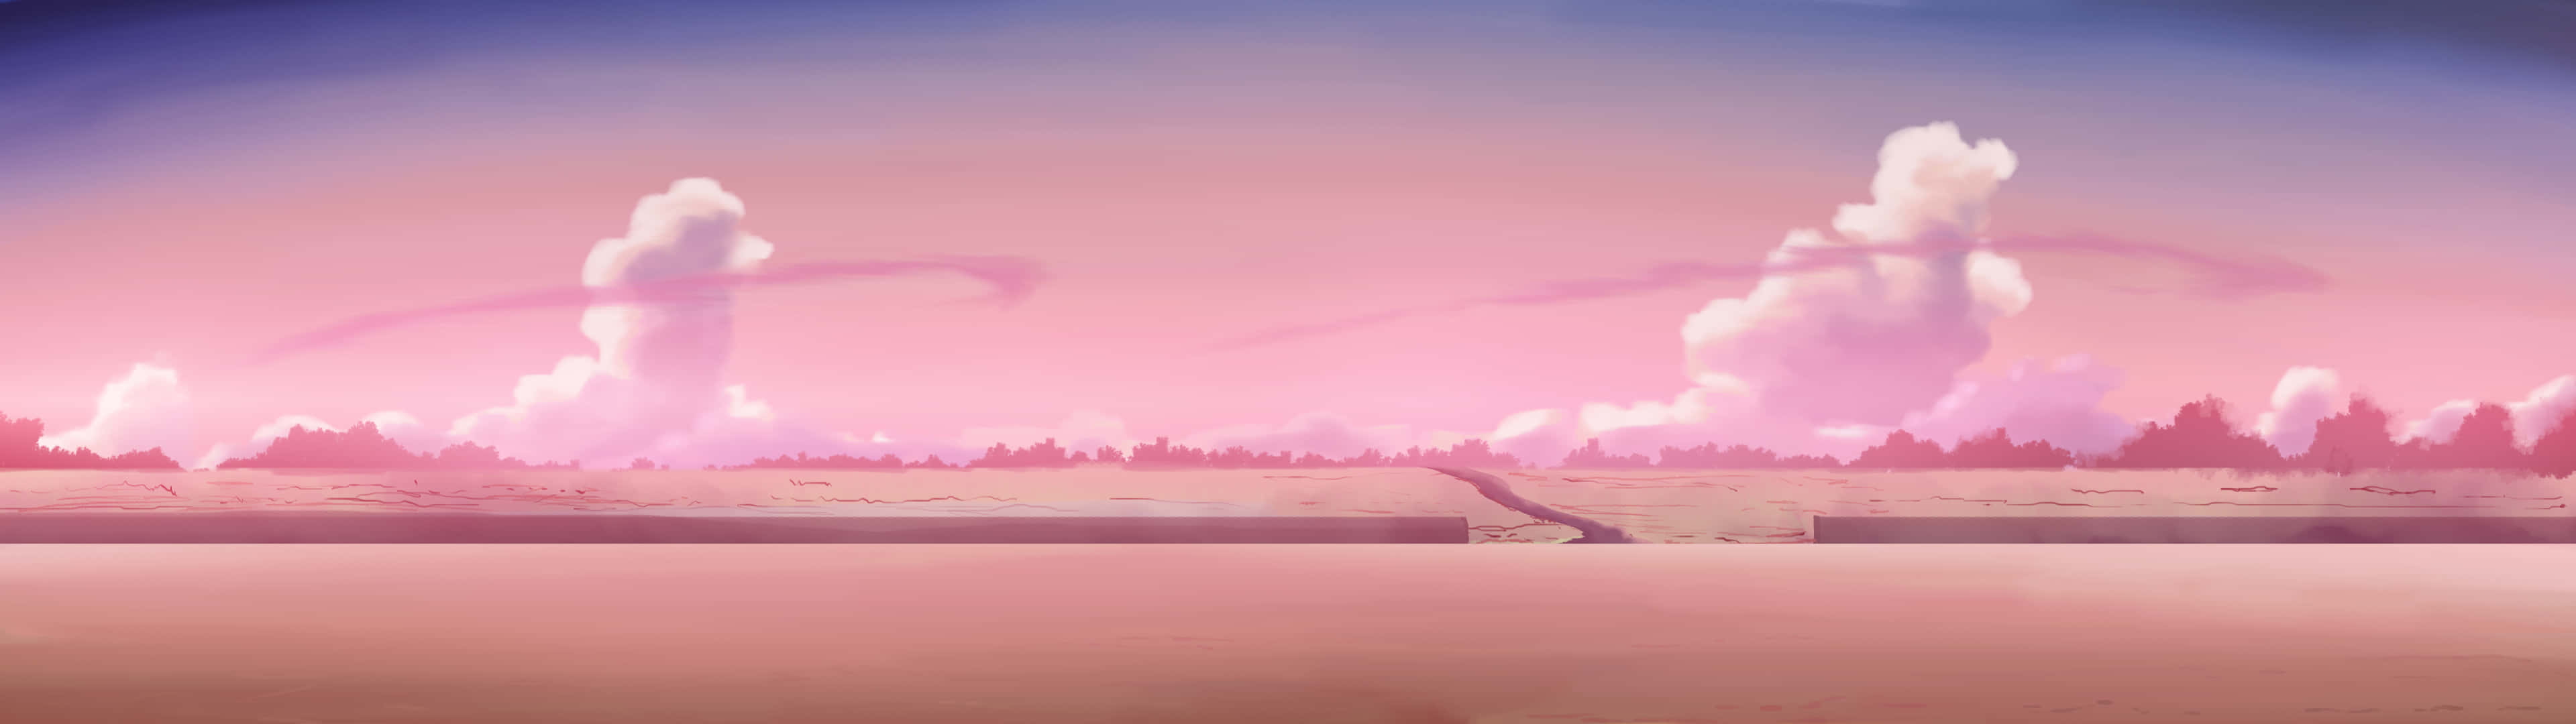 3840x1080 Anime Pink Purple Sky Picture